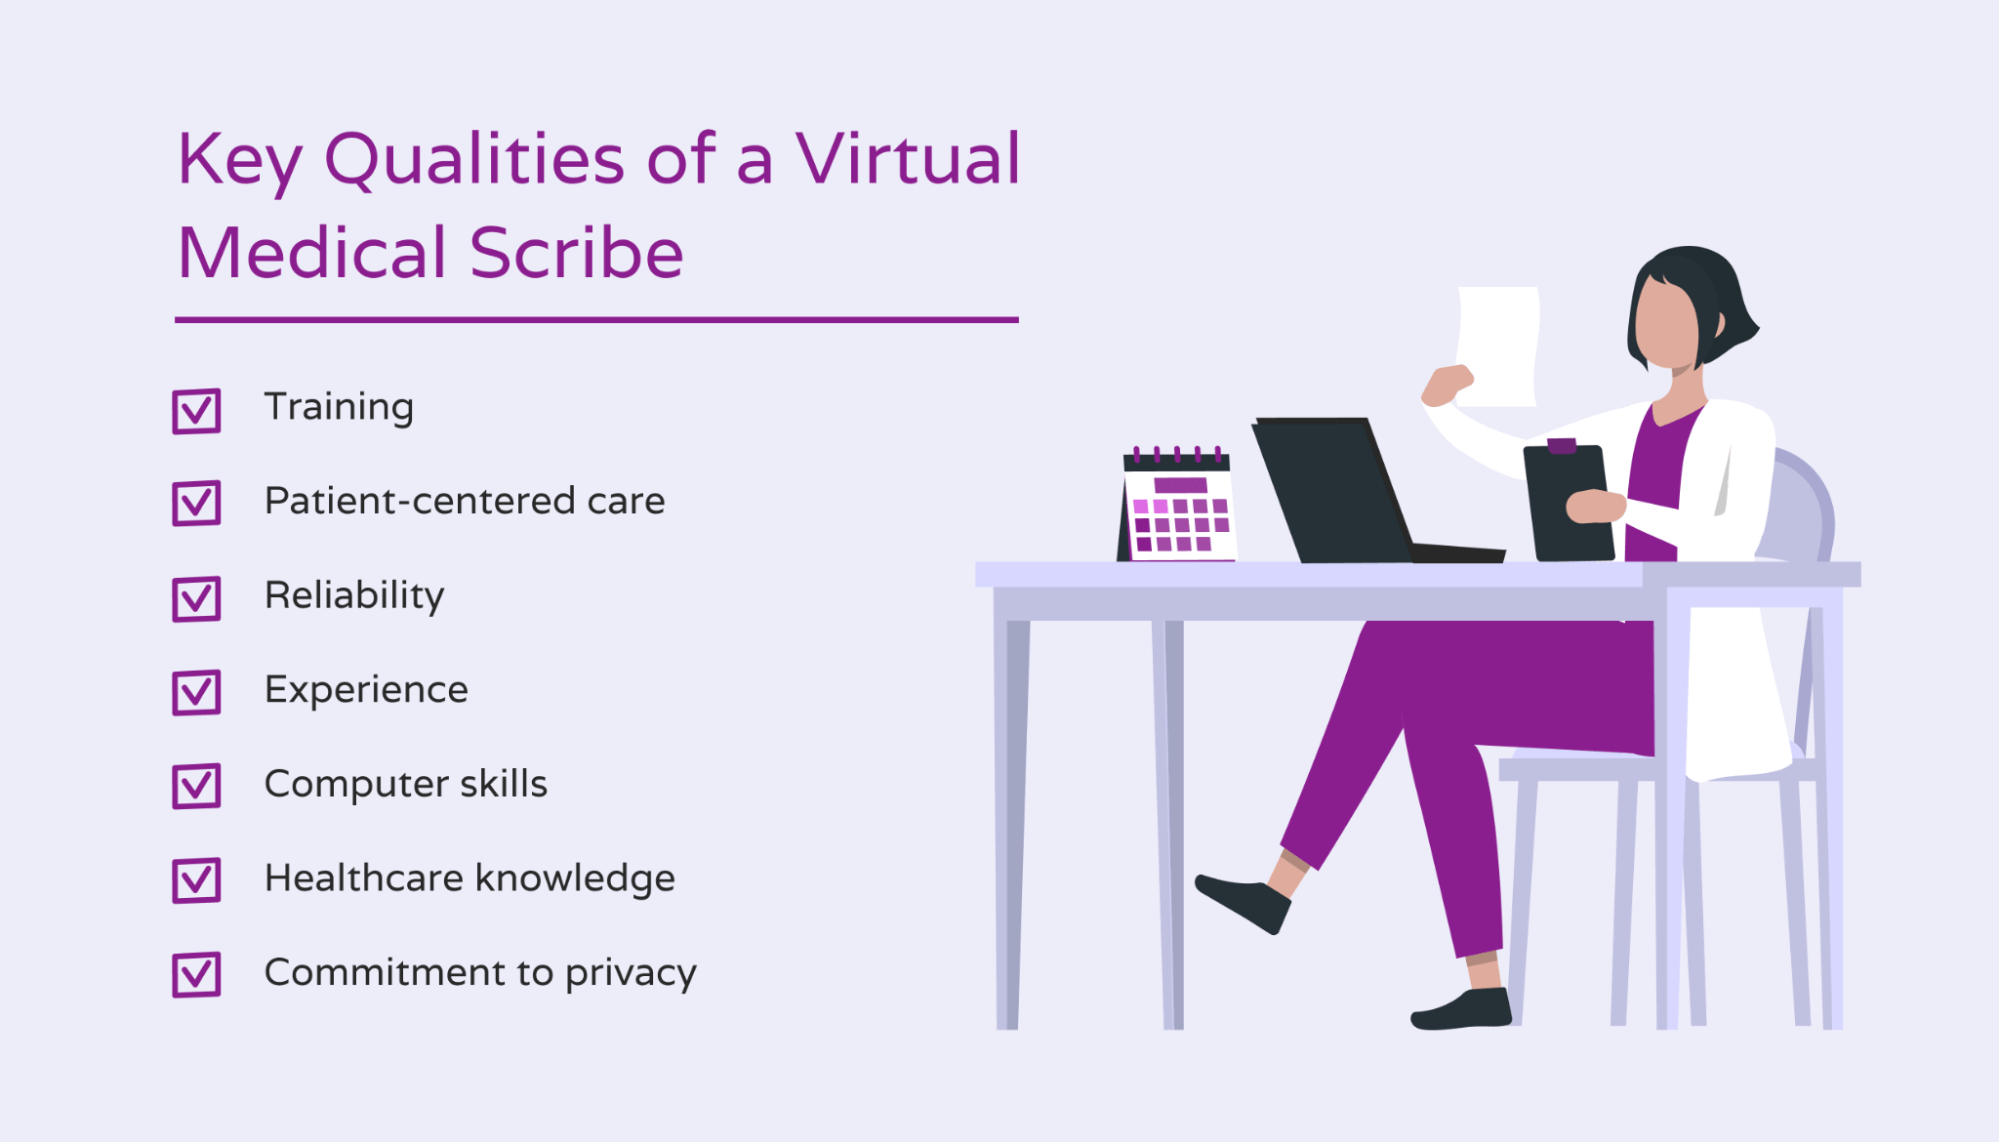 What are the key qualities of a virtual medical scribe